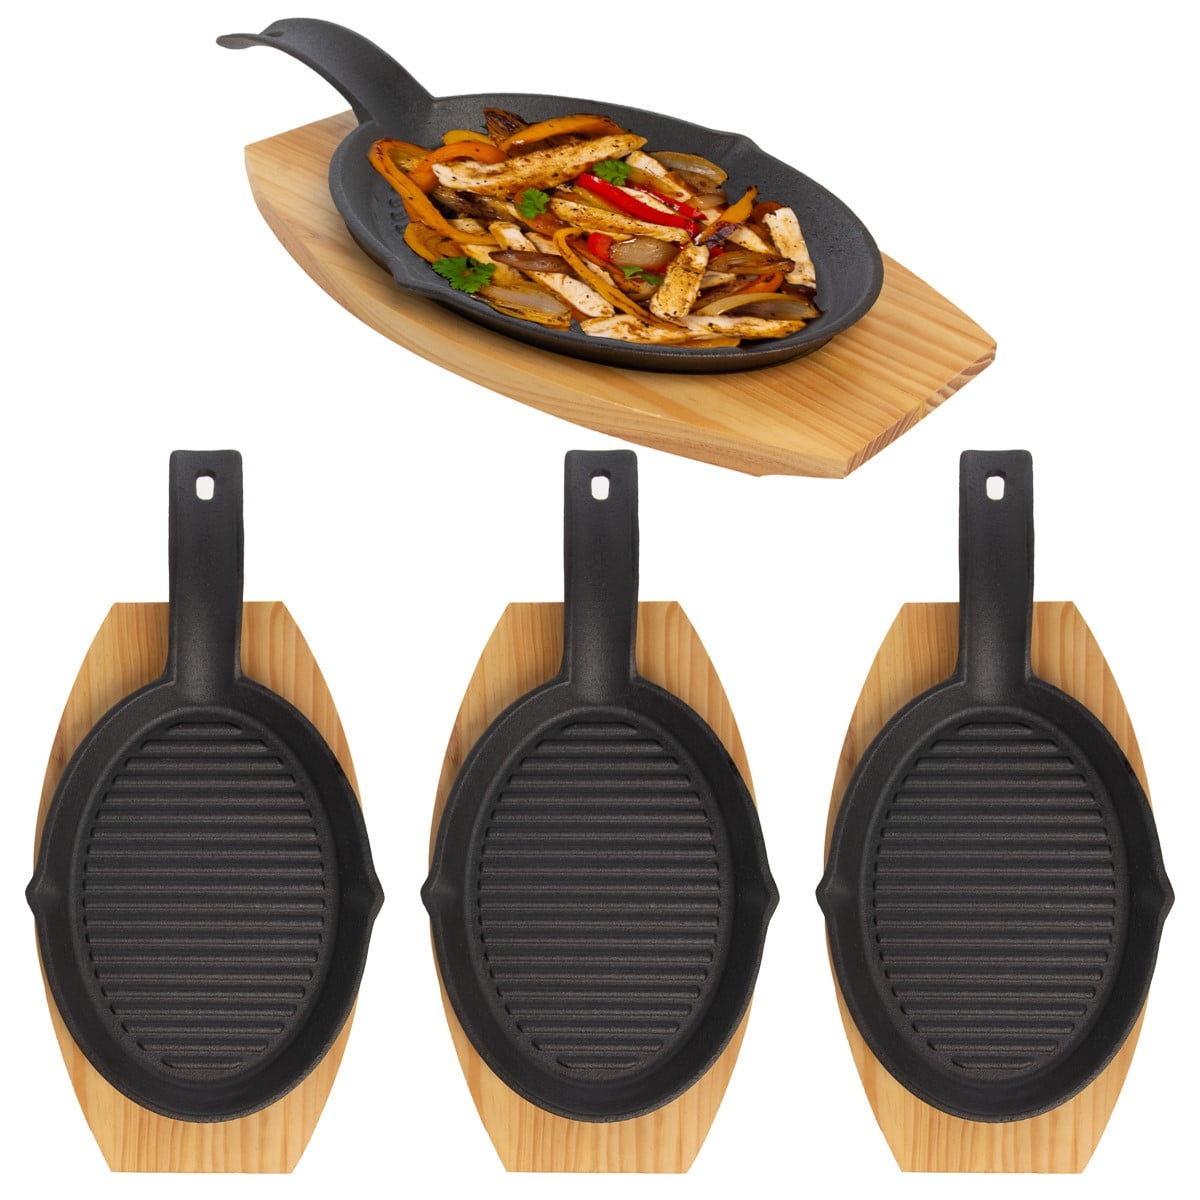 Mr. Bar-BQ Cast Iron Fajita Skillet Set | Sizzling Plate with Wooden Base  and Cloth Handles | Impress your Dinner Guests with an Authentic Fajita  Meal